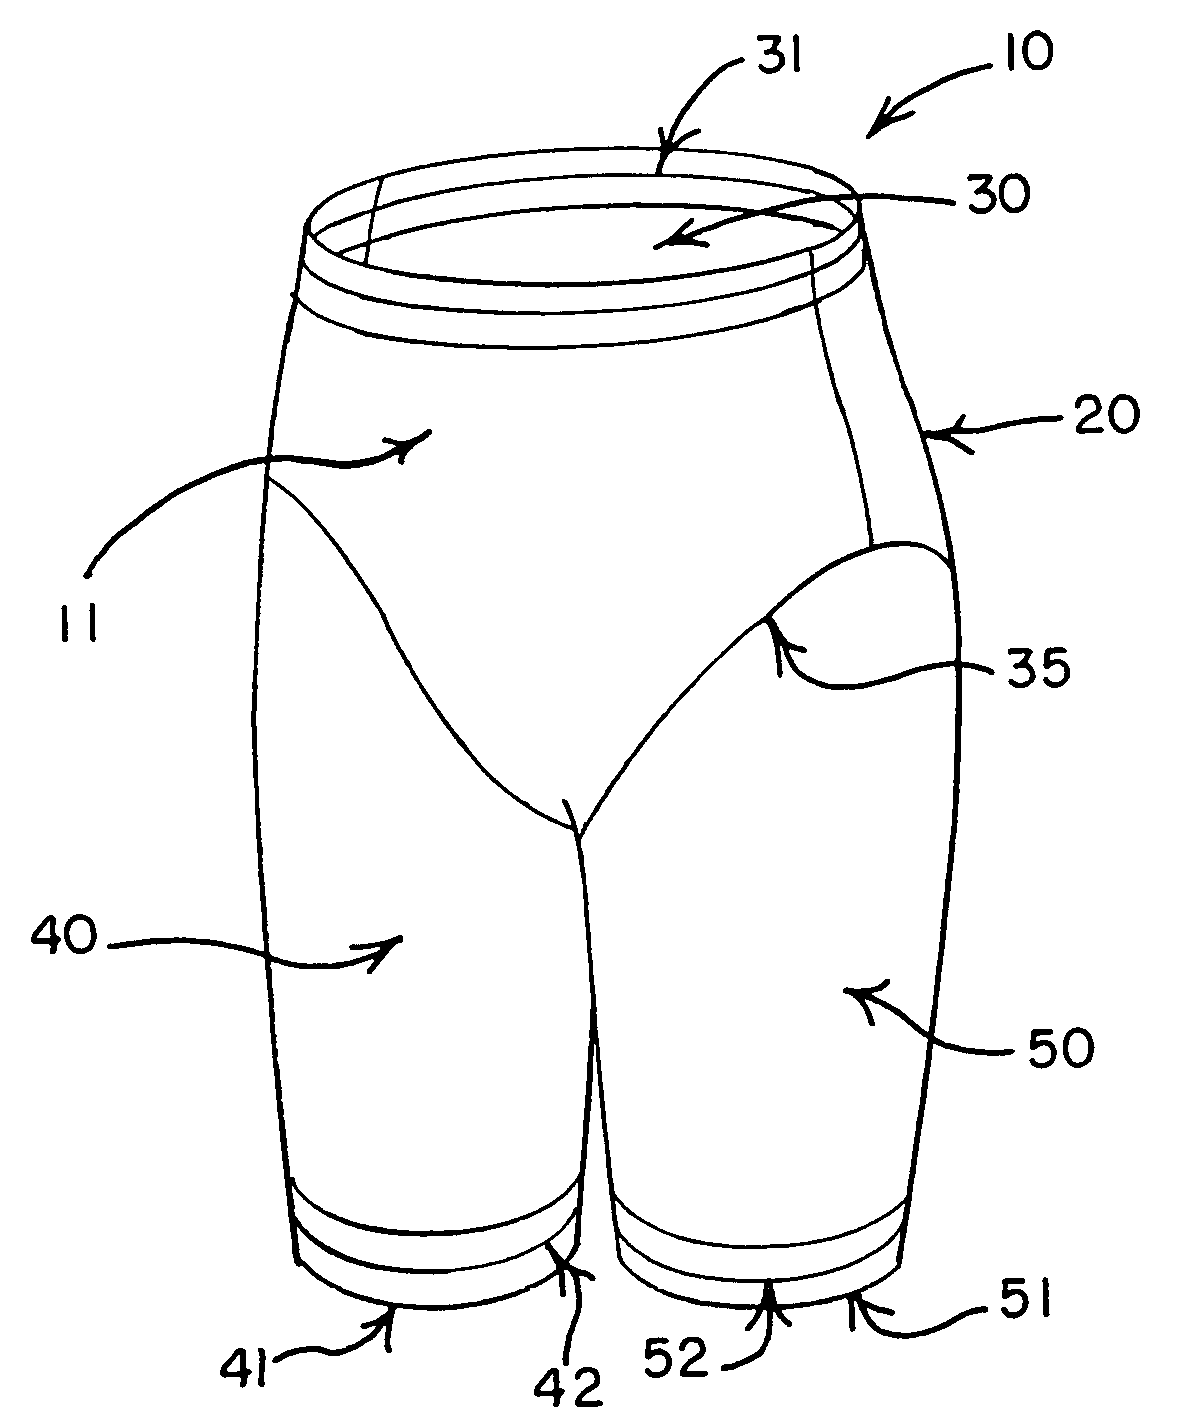 Topical medication garment and system and method for providing topical medication